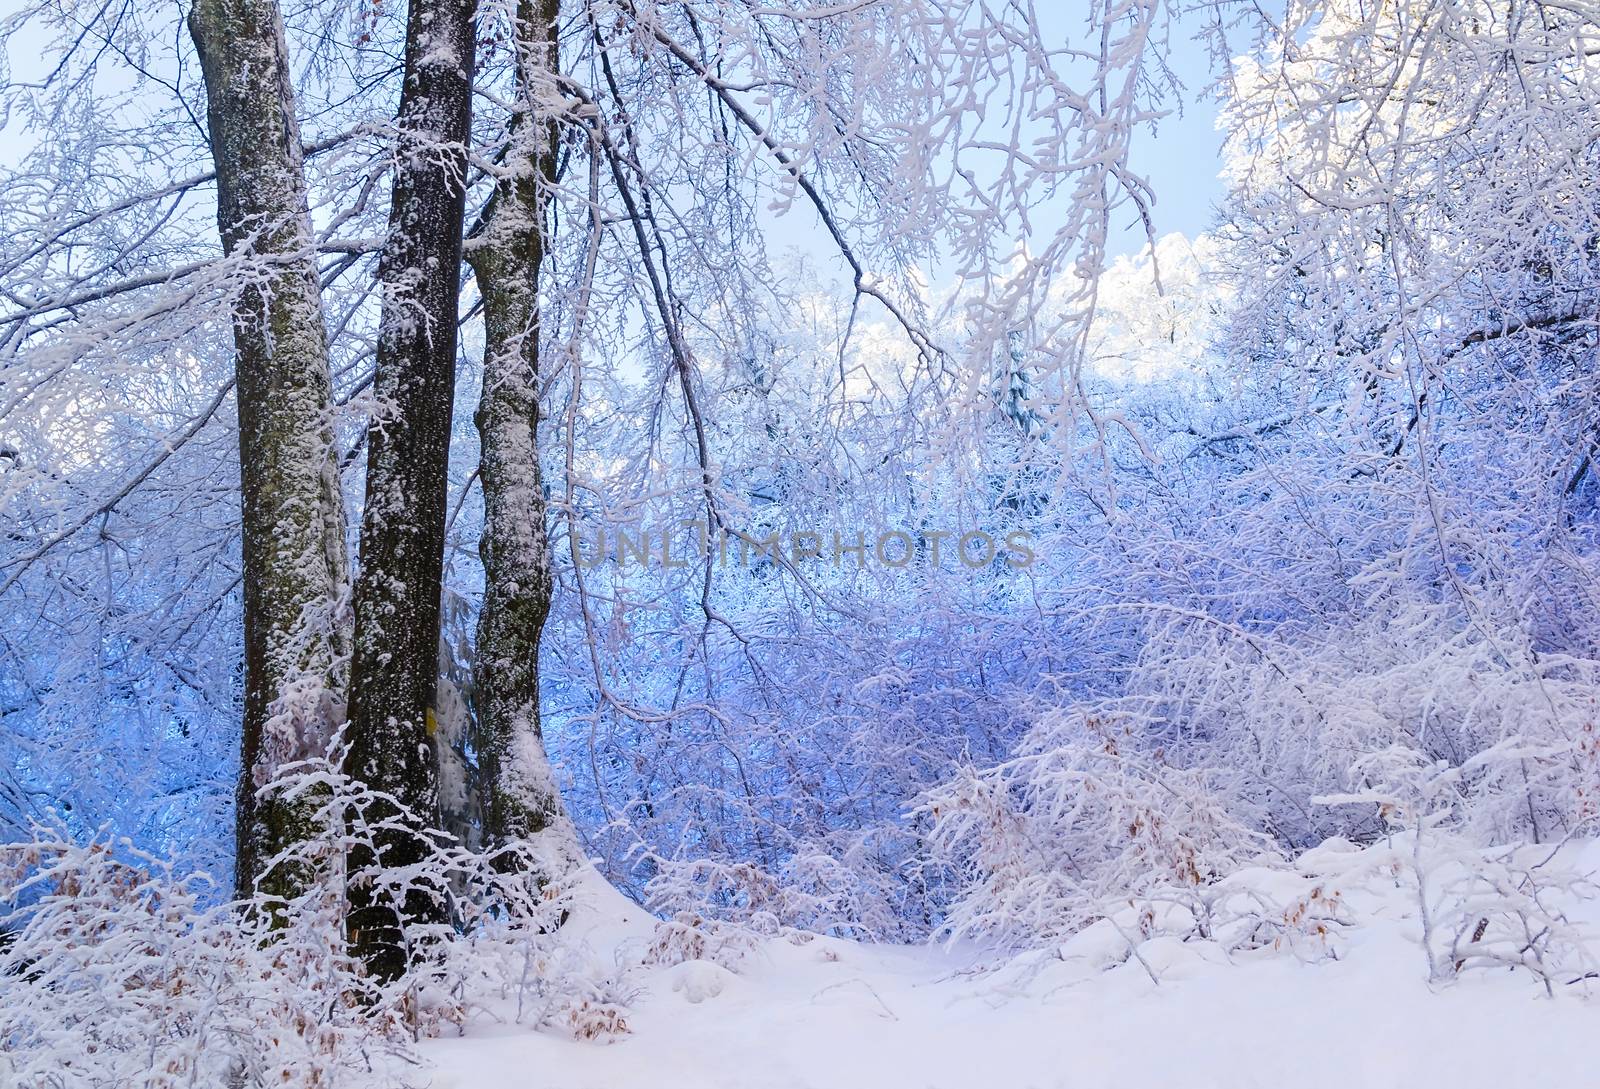 Blue snowy forest. Trees covered with snow. Three trees in front. Winter. Ukraine.